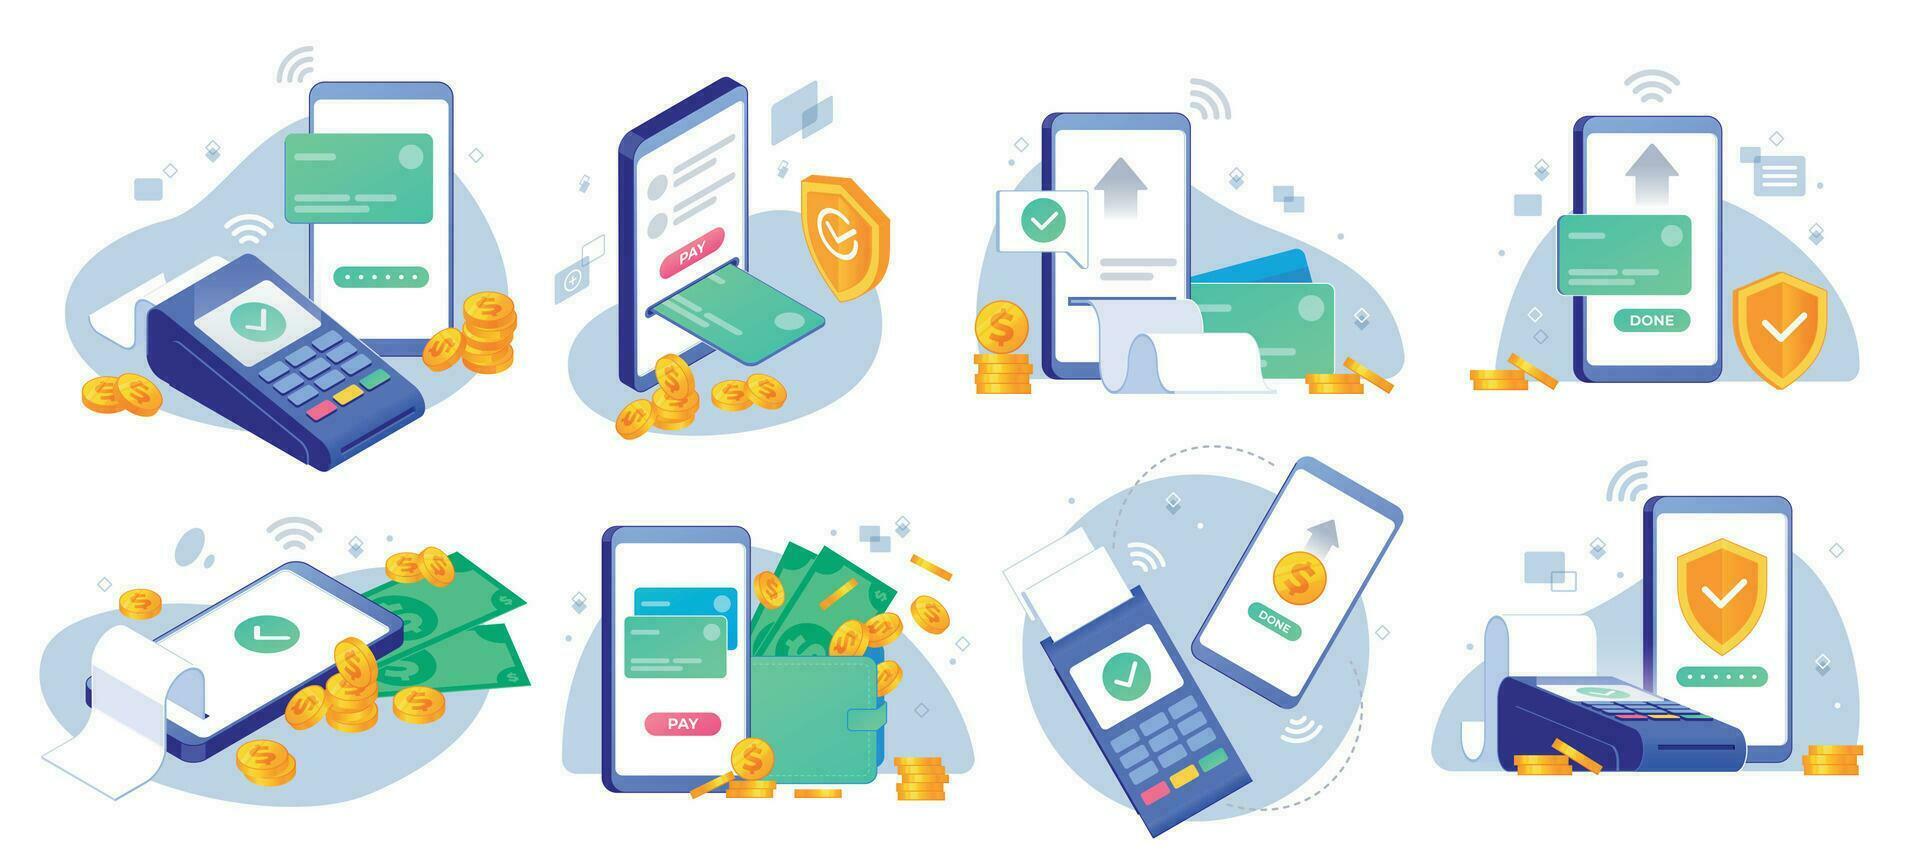 Mobile payments. Online sending money from mobile wallet to bank card, golden coins transfer app and e payment vector illustration set